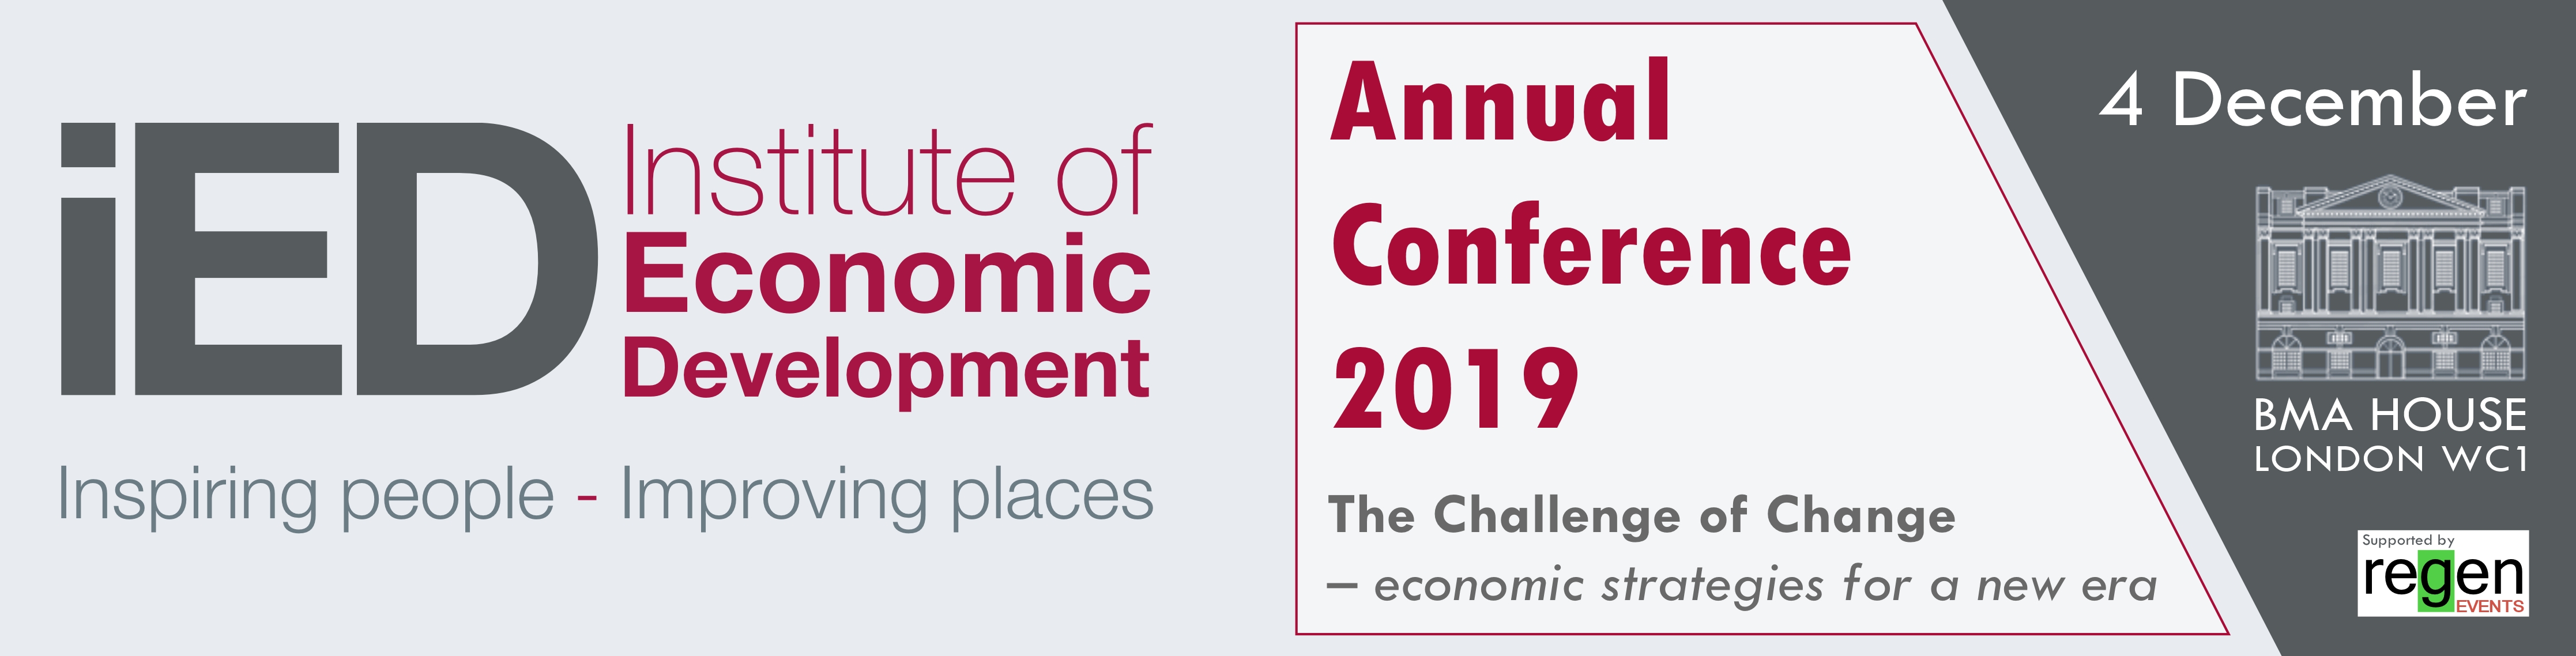 IED 2019 Annual Conference banner